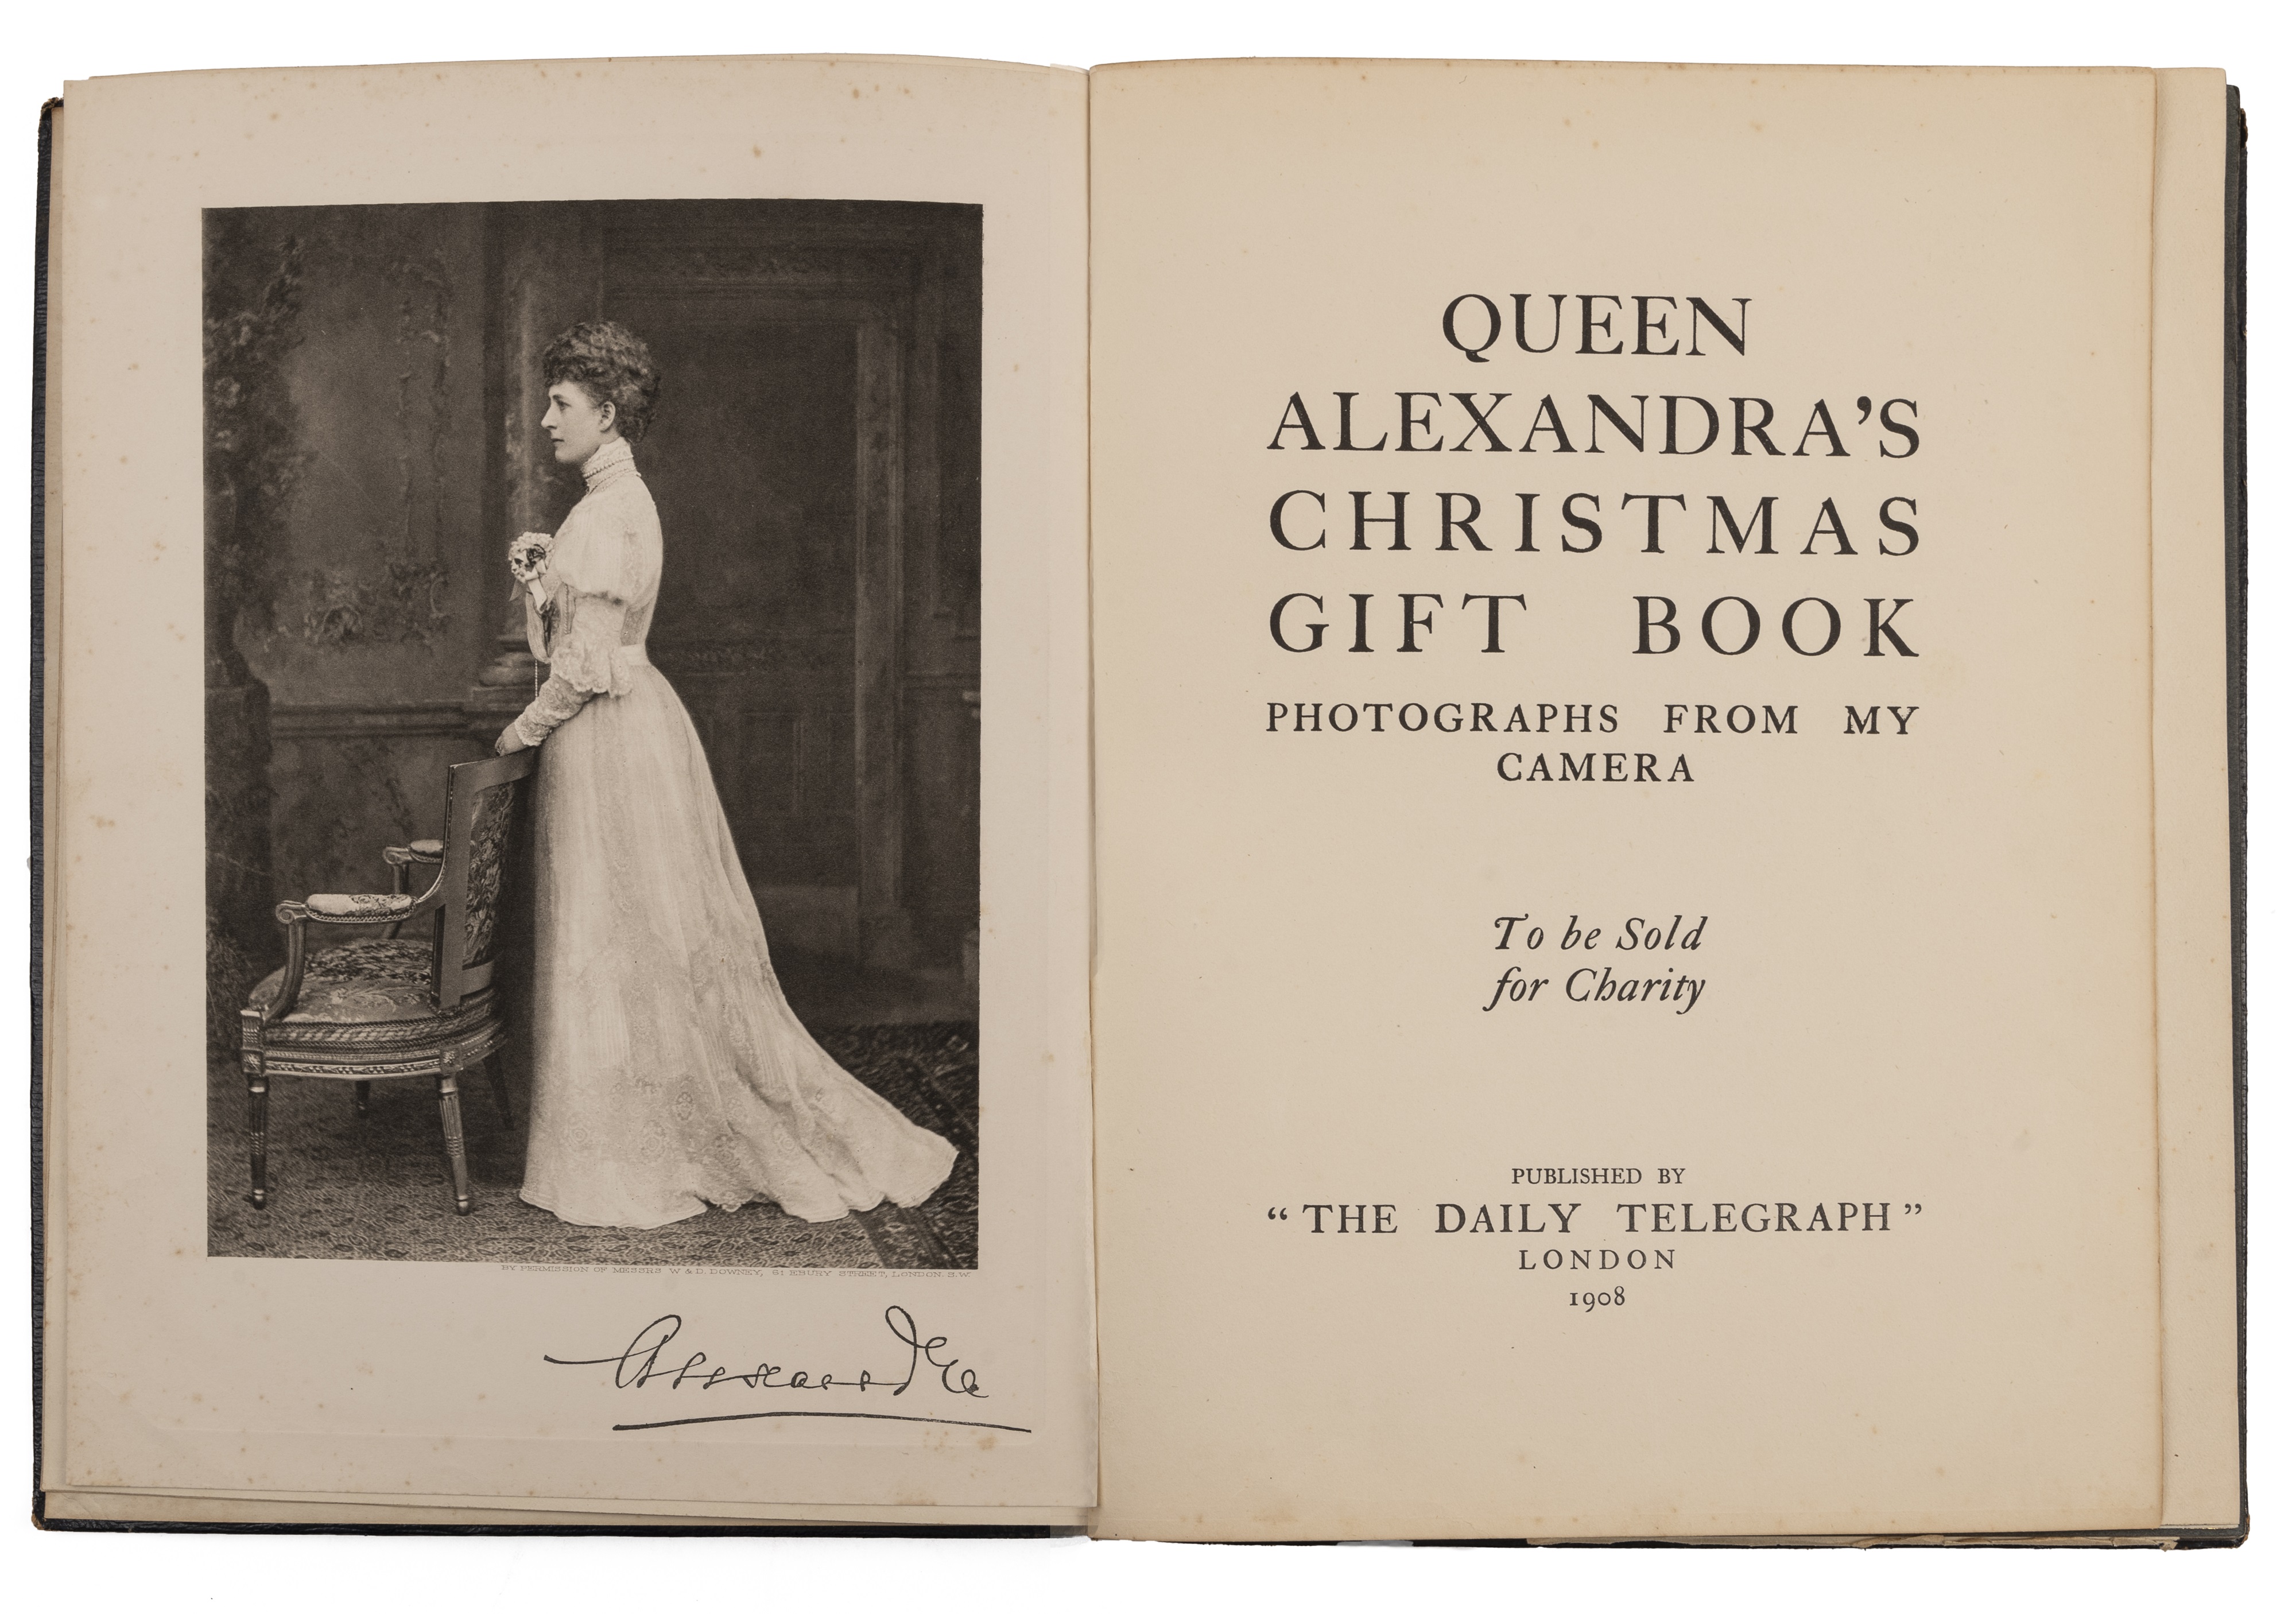 Queen Alexandra's Christmas Gilft Book. 'Photographs from my Camera'. Daily Telegraph 1908 plus King - Image 2 of 4